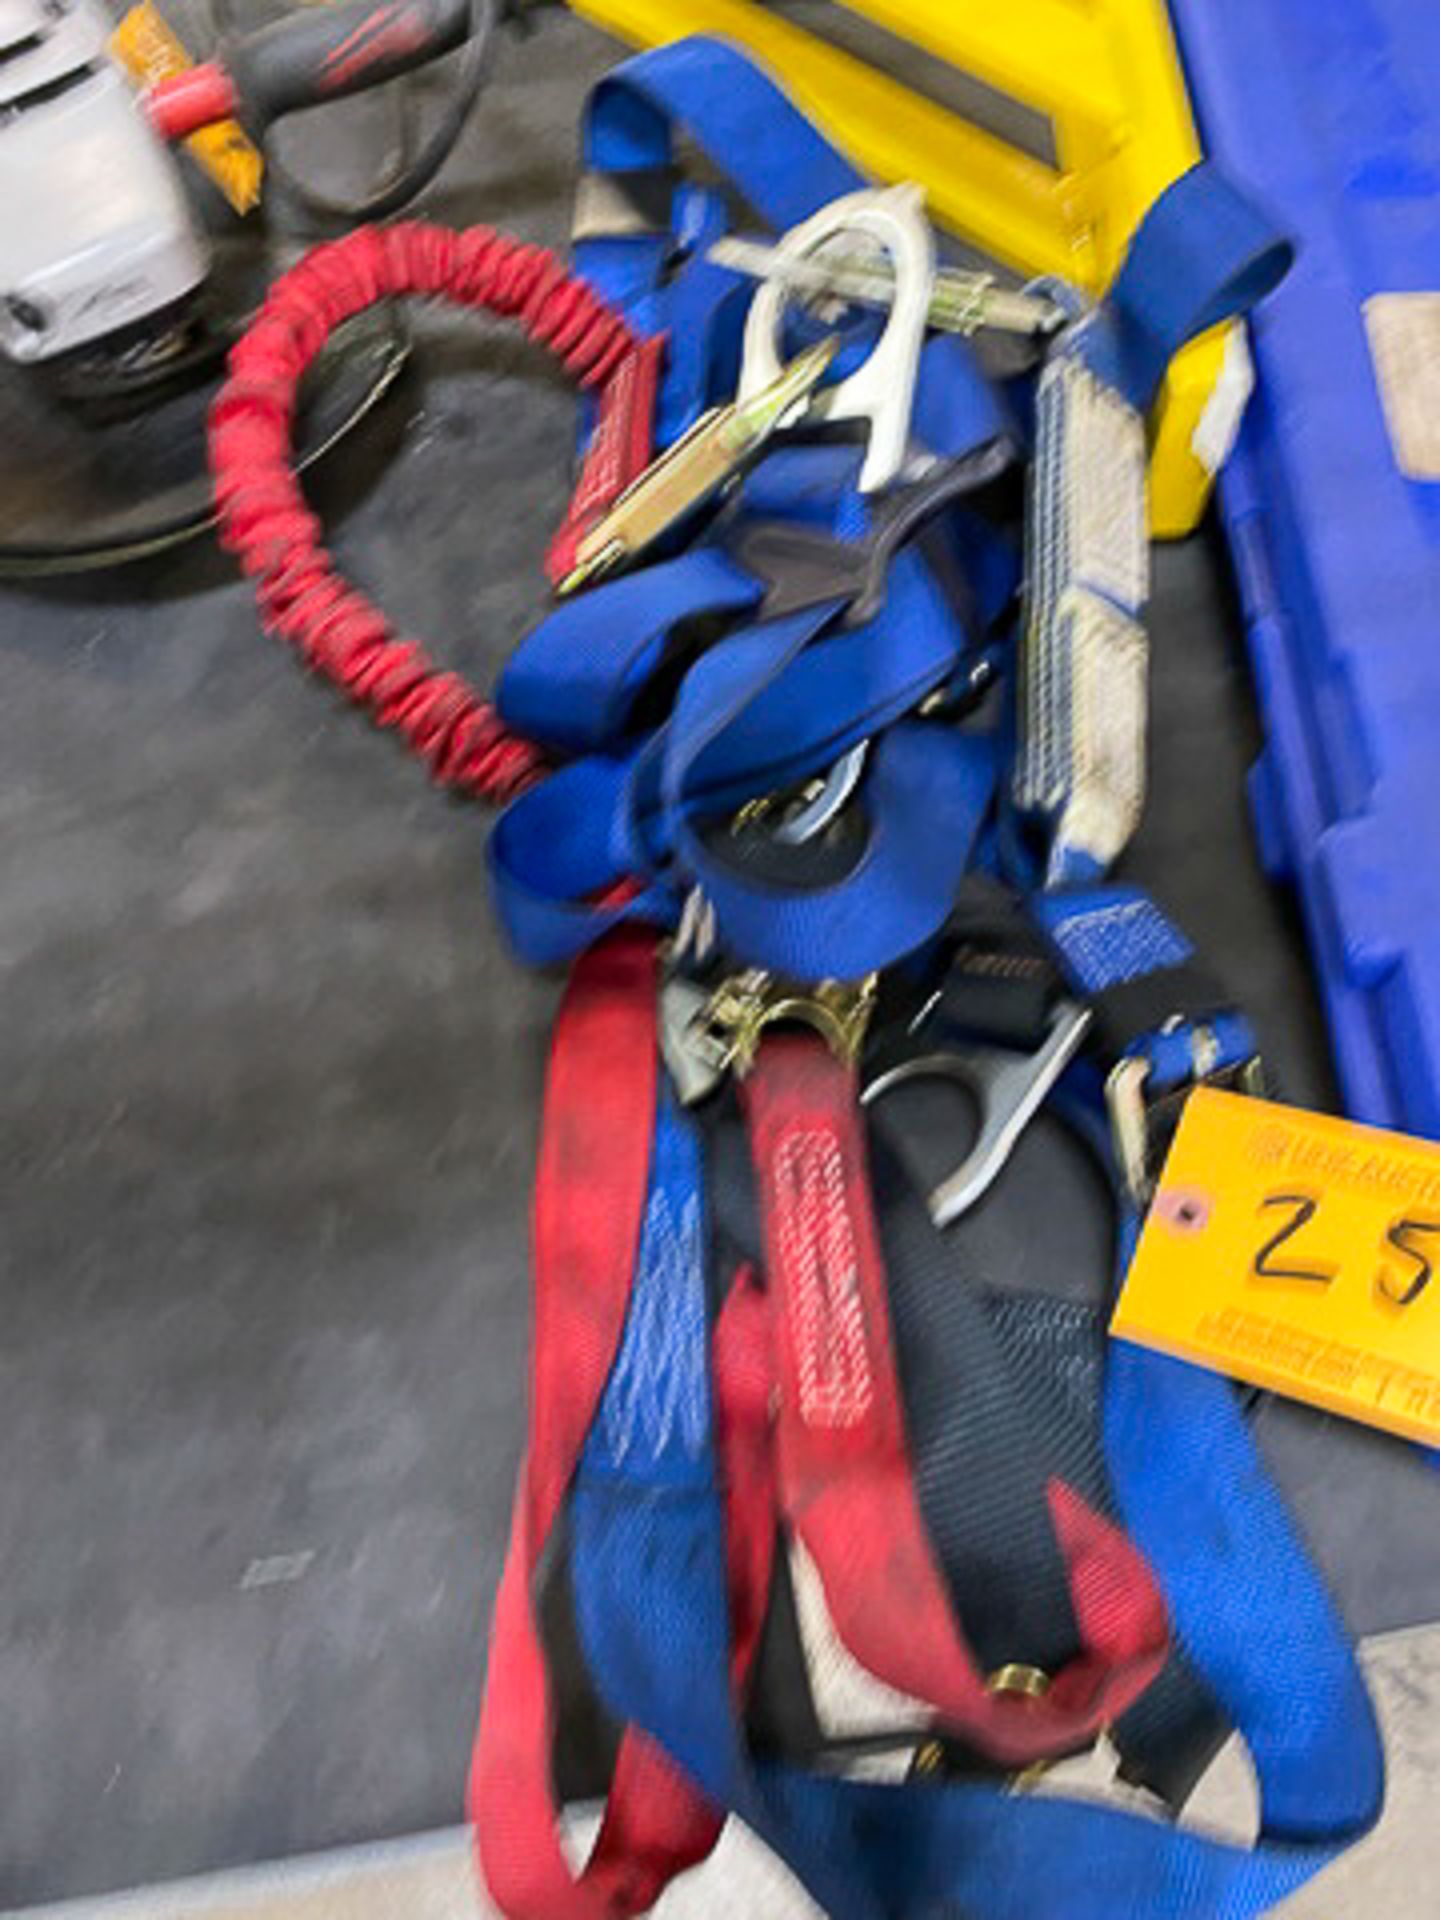 Protecta Fall Arrest Harness - Image 4 of 4